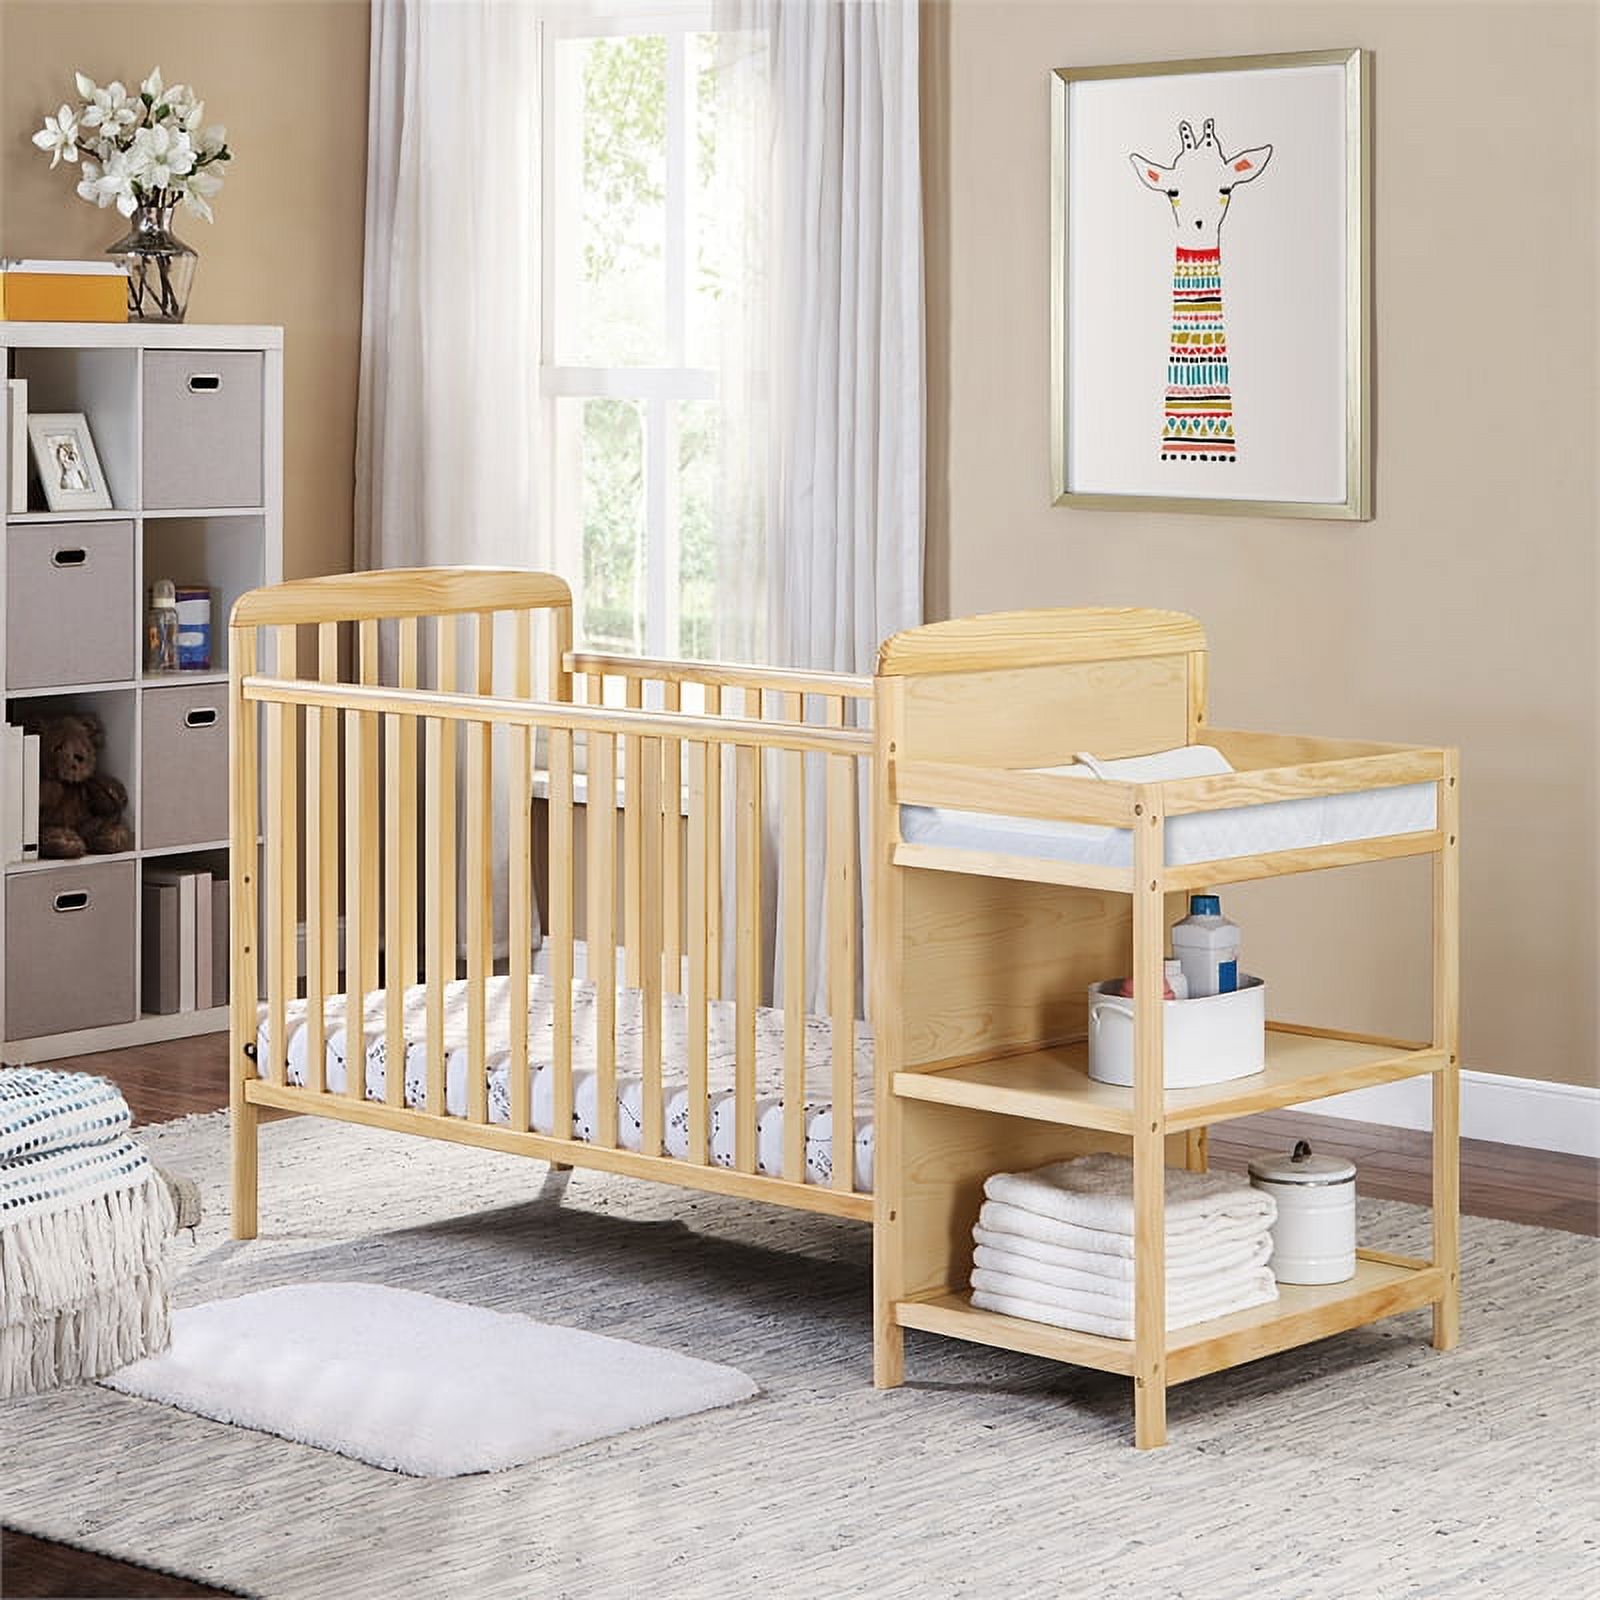 Suite Bebe  Ramsey Crib & Changer Combo, Natural - image 3 of 5